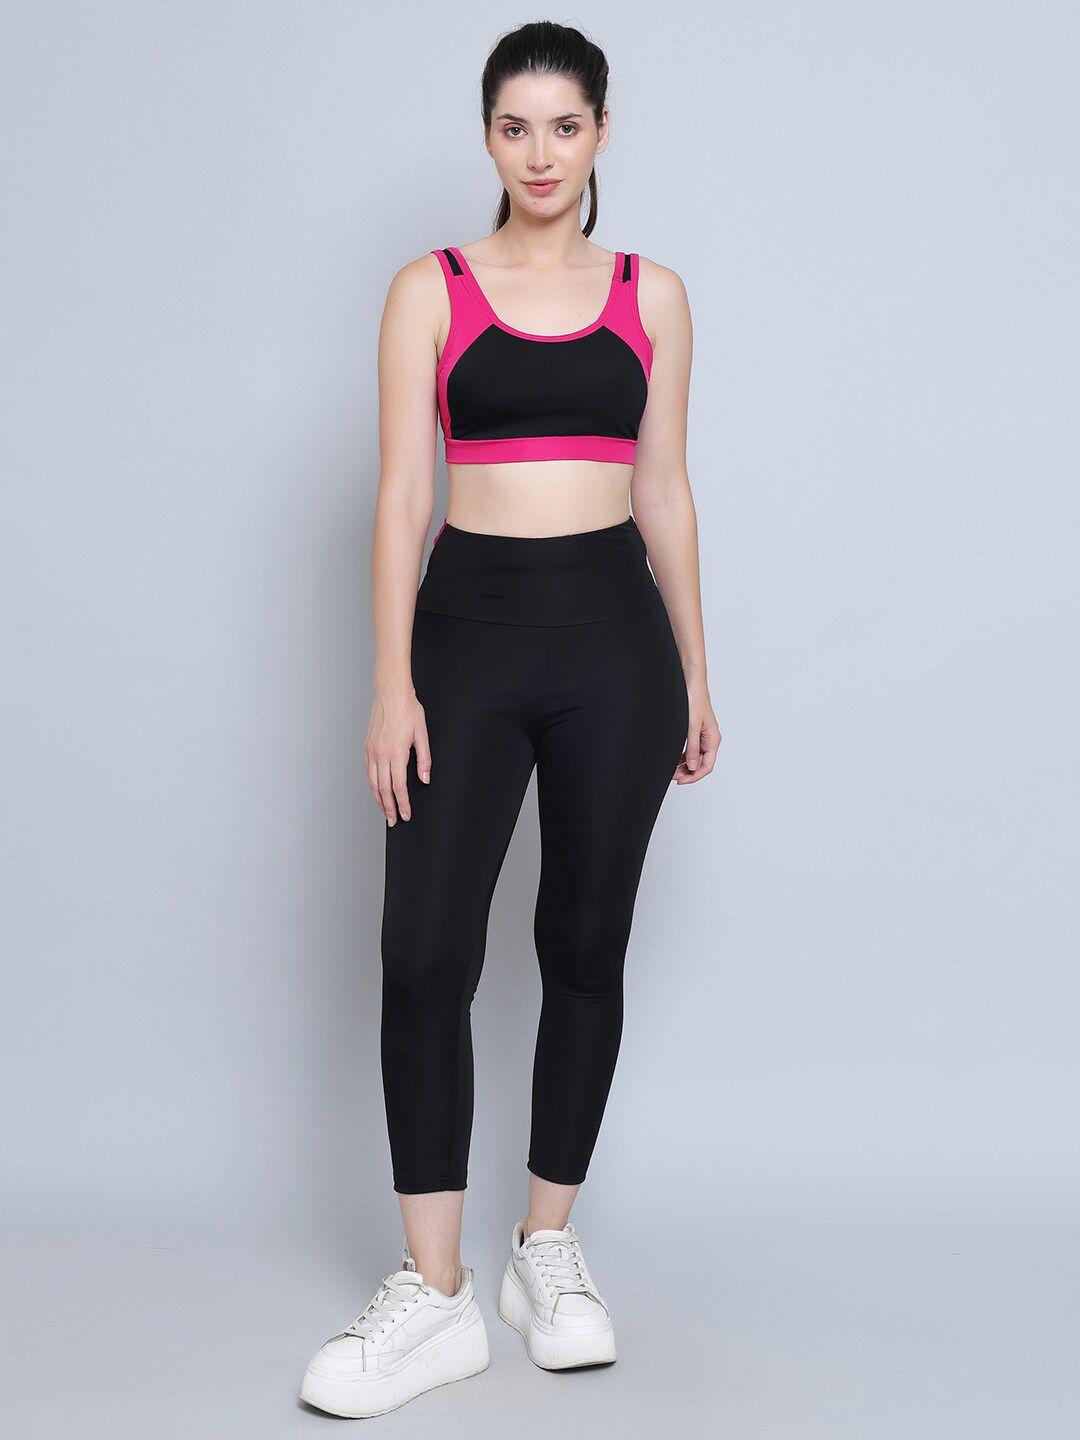 n-gal round neck high-rise sports tights & crop top